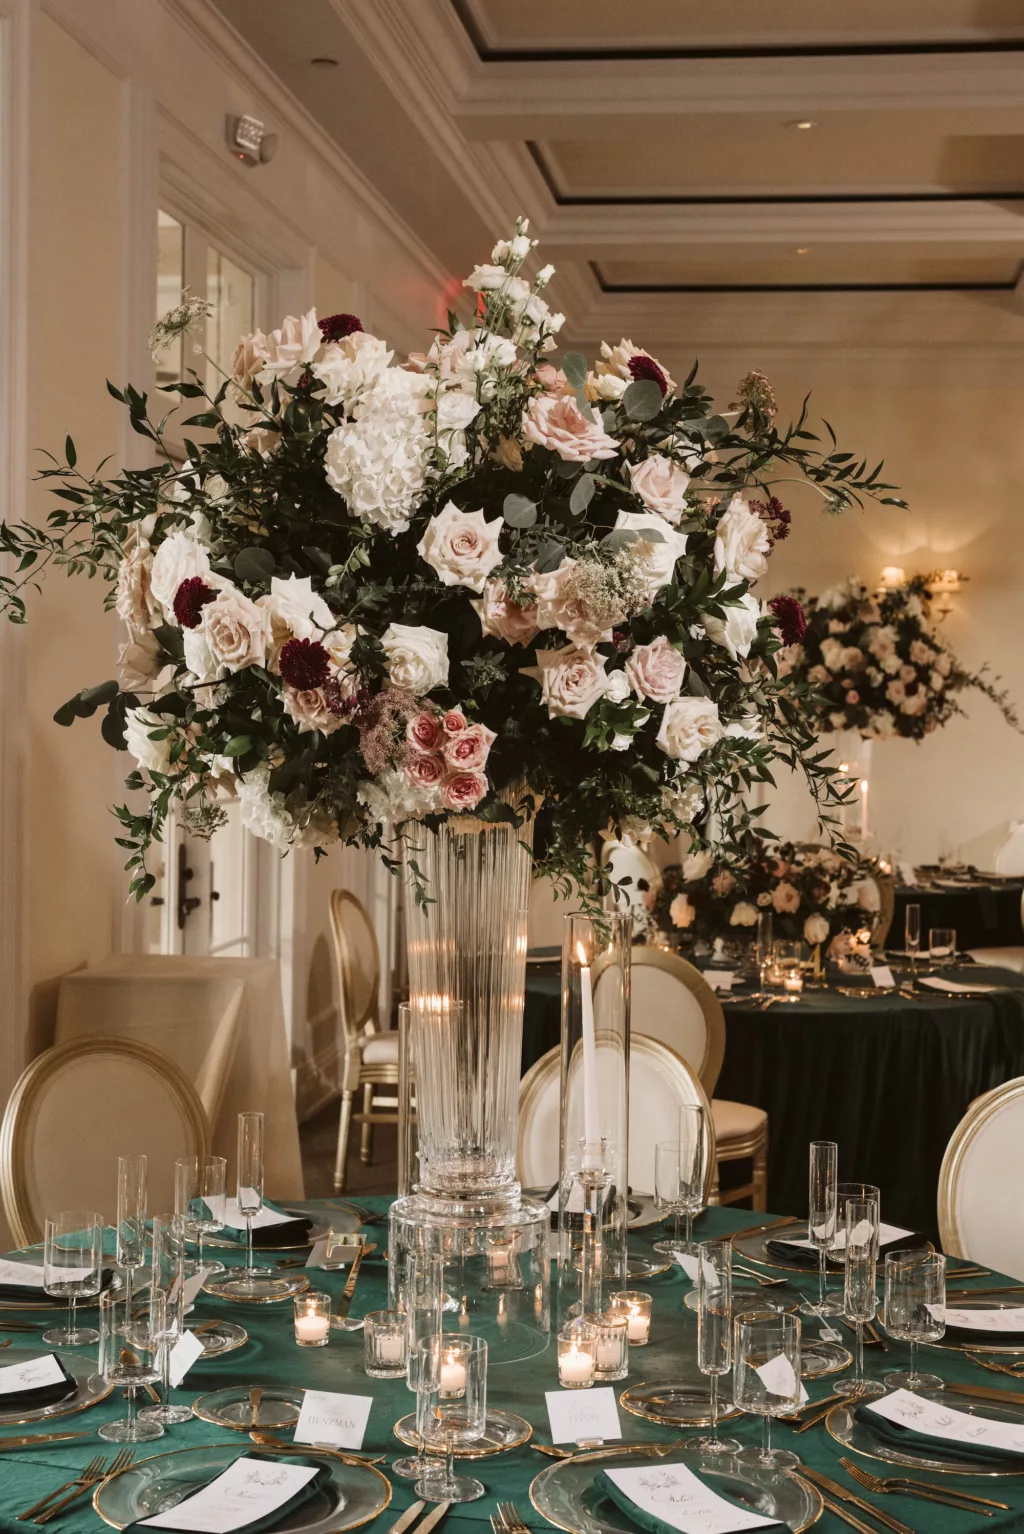 Elegant Tall Flower Vase with Fall White Roses, Pink Roses, Hydrangeas, Purple Chrysanthemums, and Greenery Wedding Reception Centerpiece Decor Inspiration | Tampa Bay Florist Bruce Wayne Florals